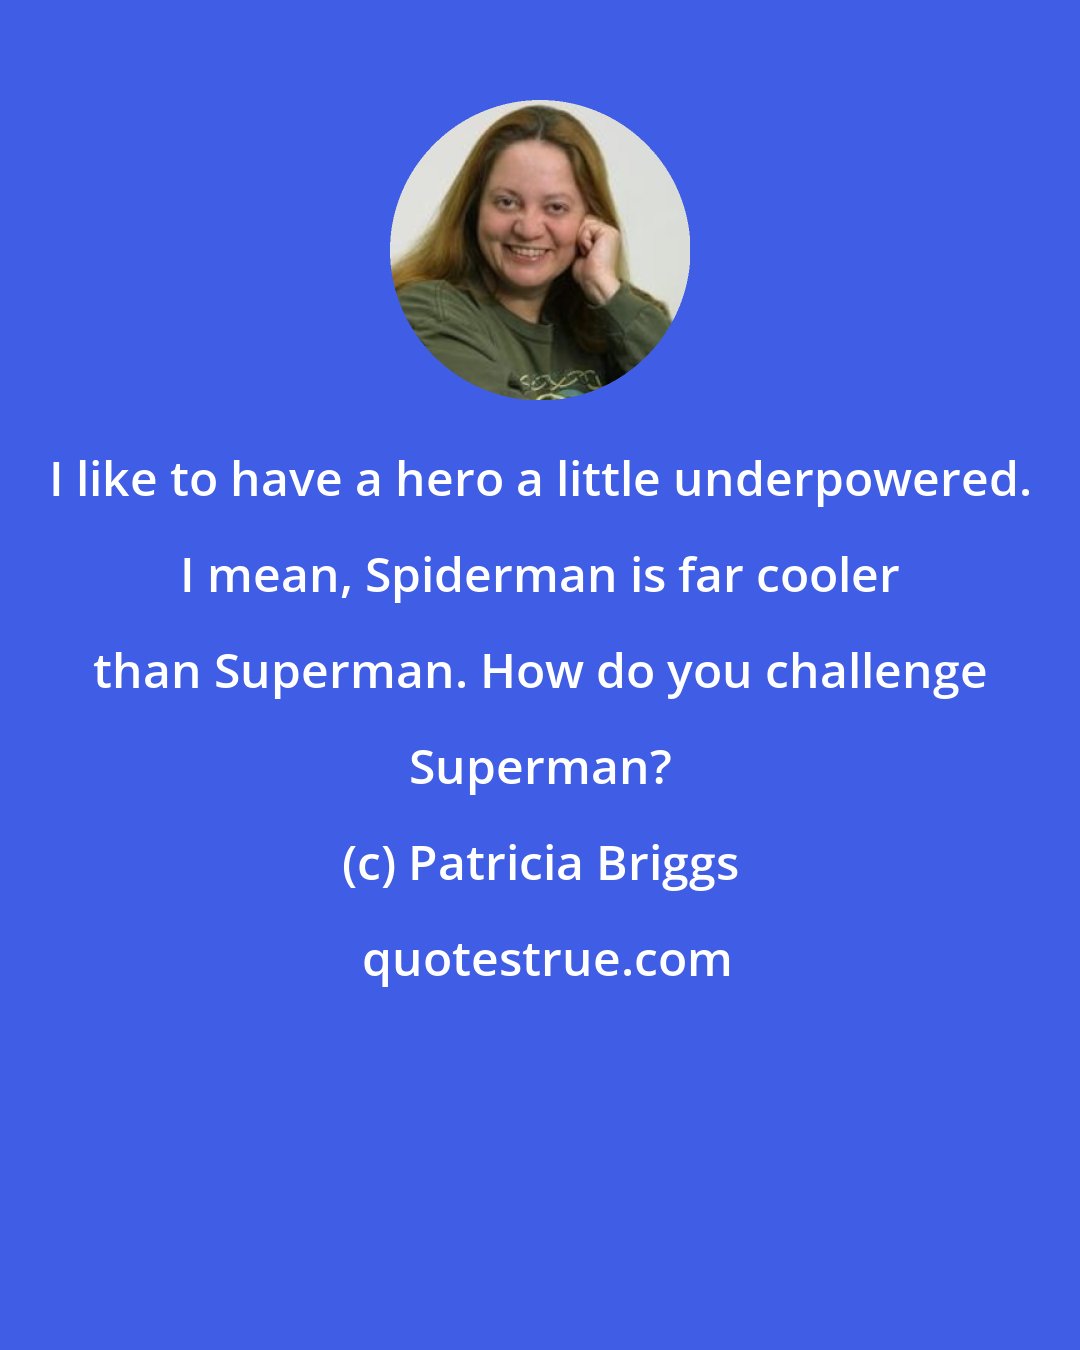 Patricia Briggs: I like to have a hero a little underpowered. I mean, Spiderman is far cooler than Superman. How do you challenge Superman?